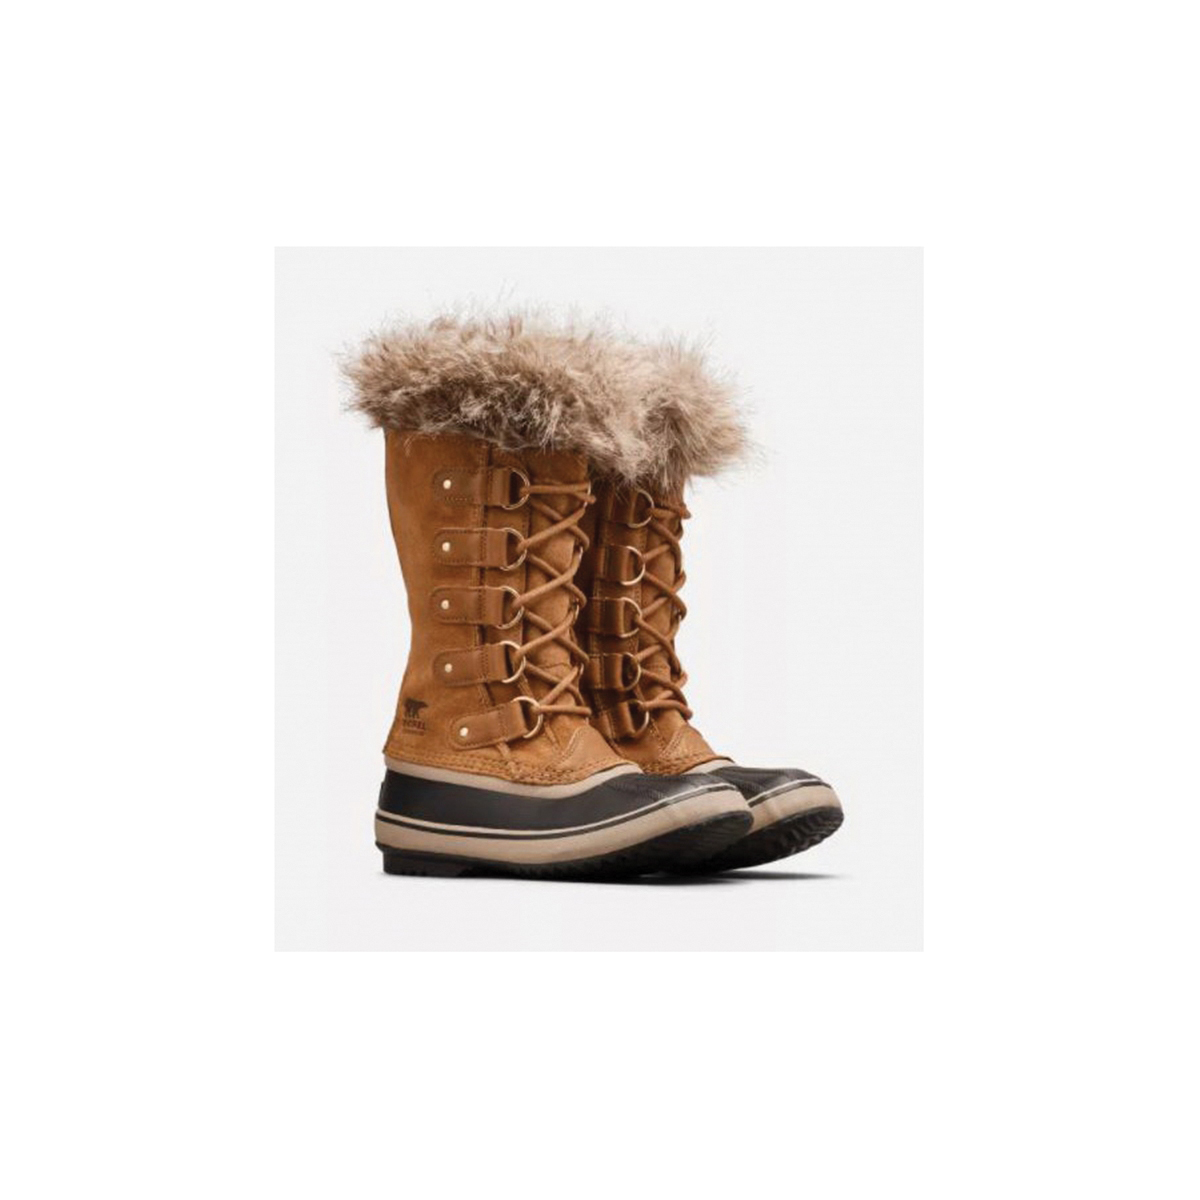 Sorel Joan Of Arctic Series 1855131-224-11 Boots, 11, Black/Camel Brown, Faux Fur/Suede, Lace, Insulated - 2